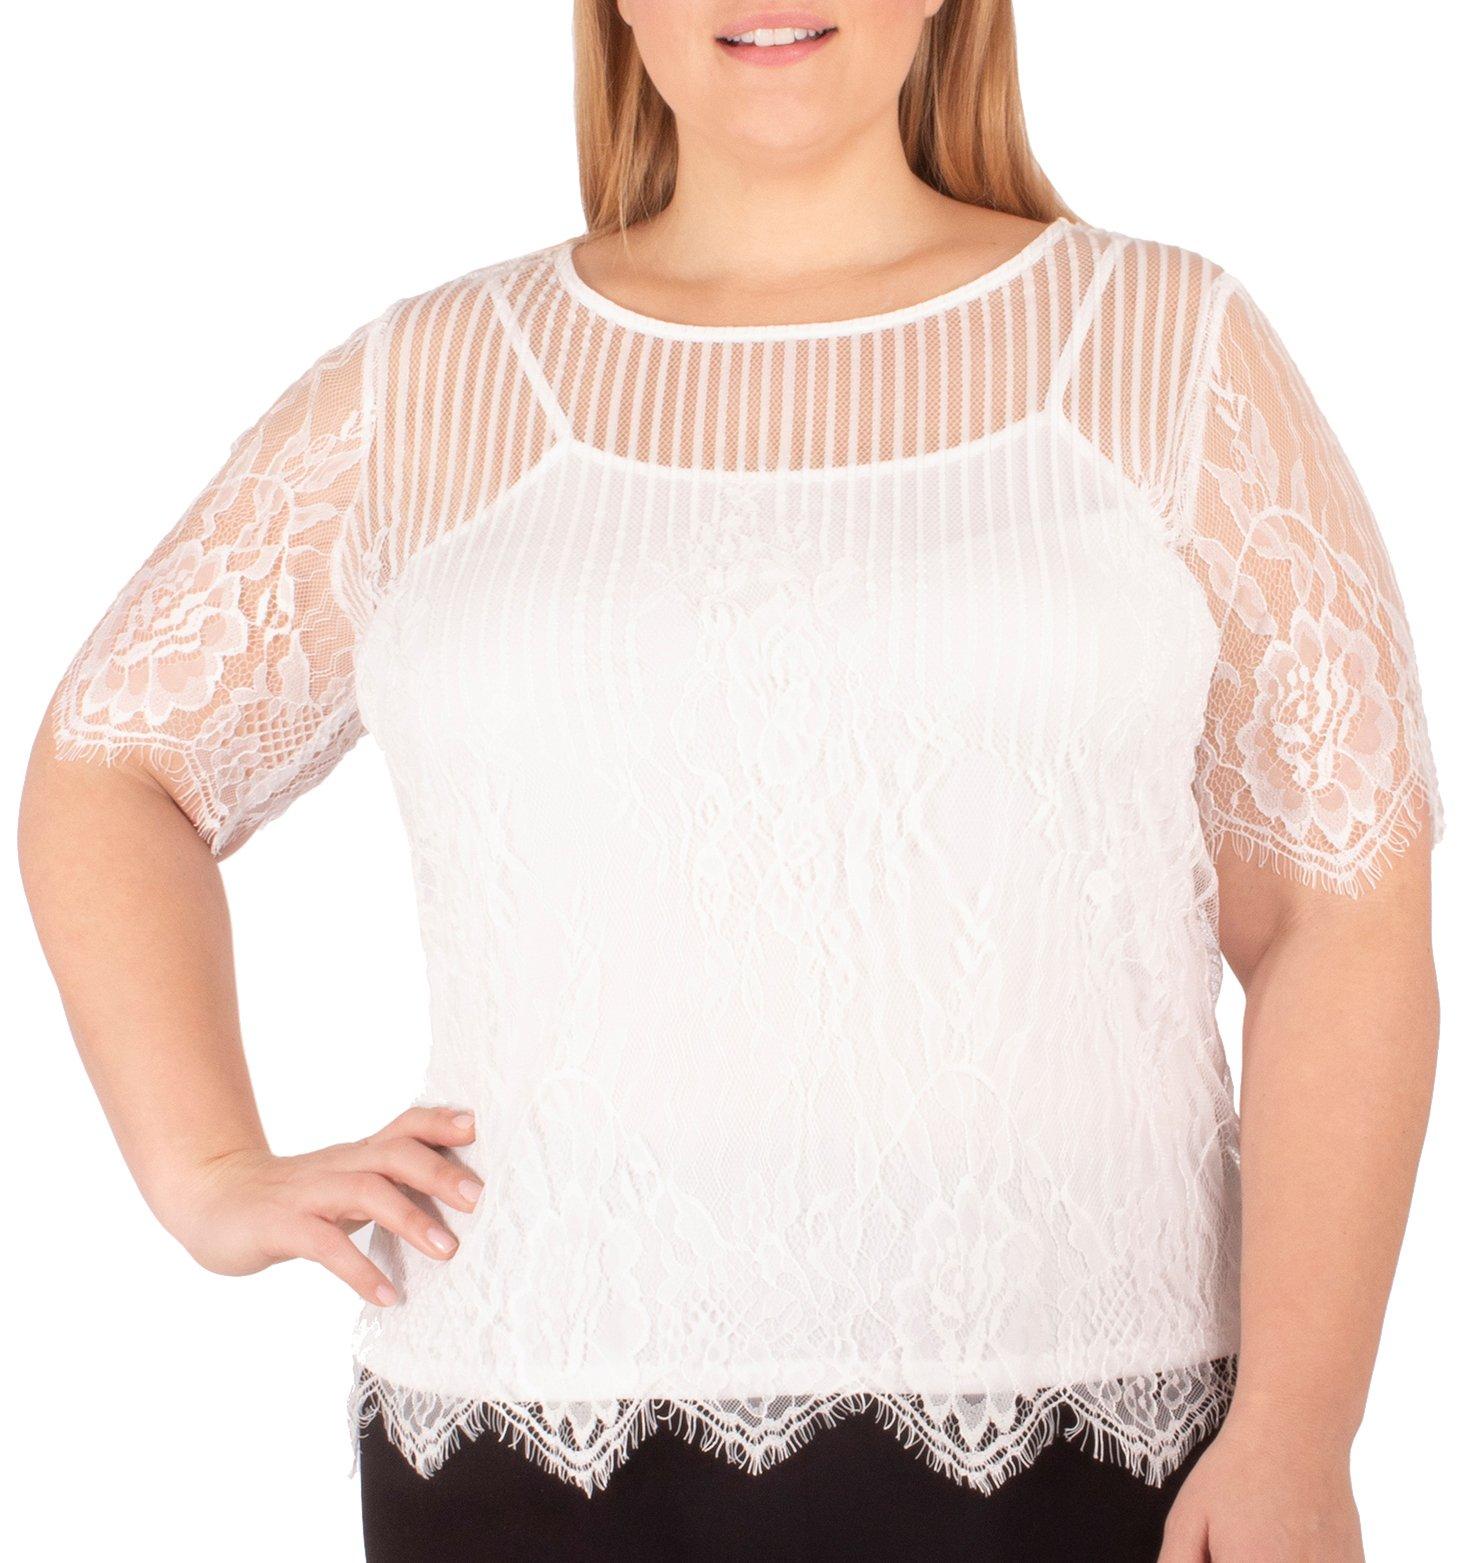 Plus Jewel Neck Lace Top with Camisole